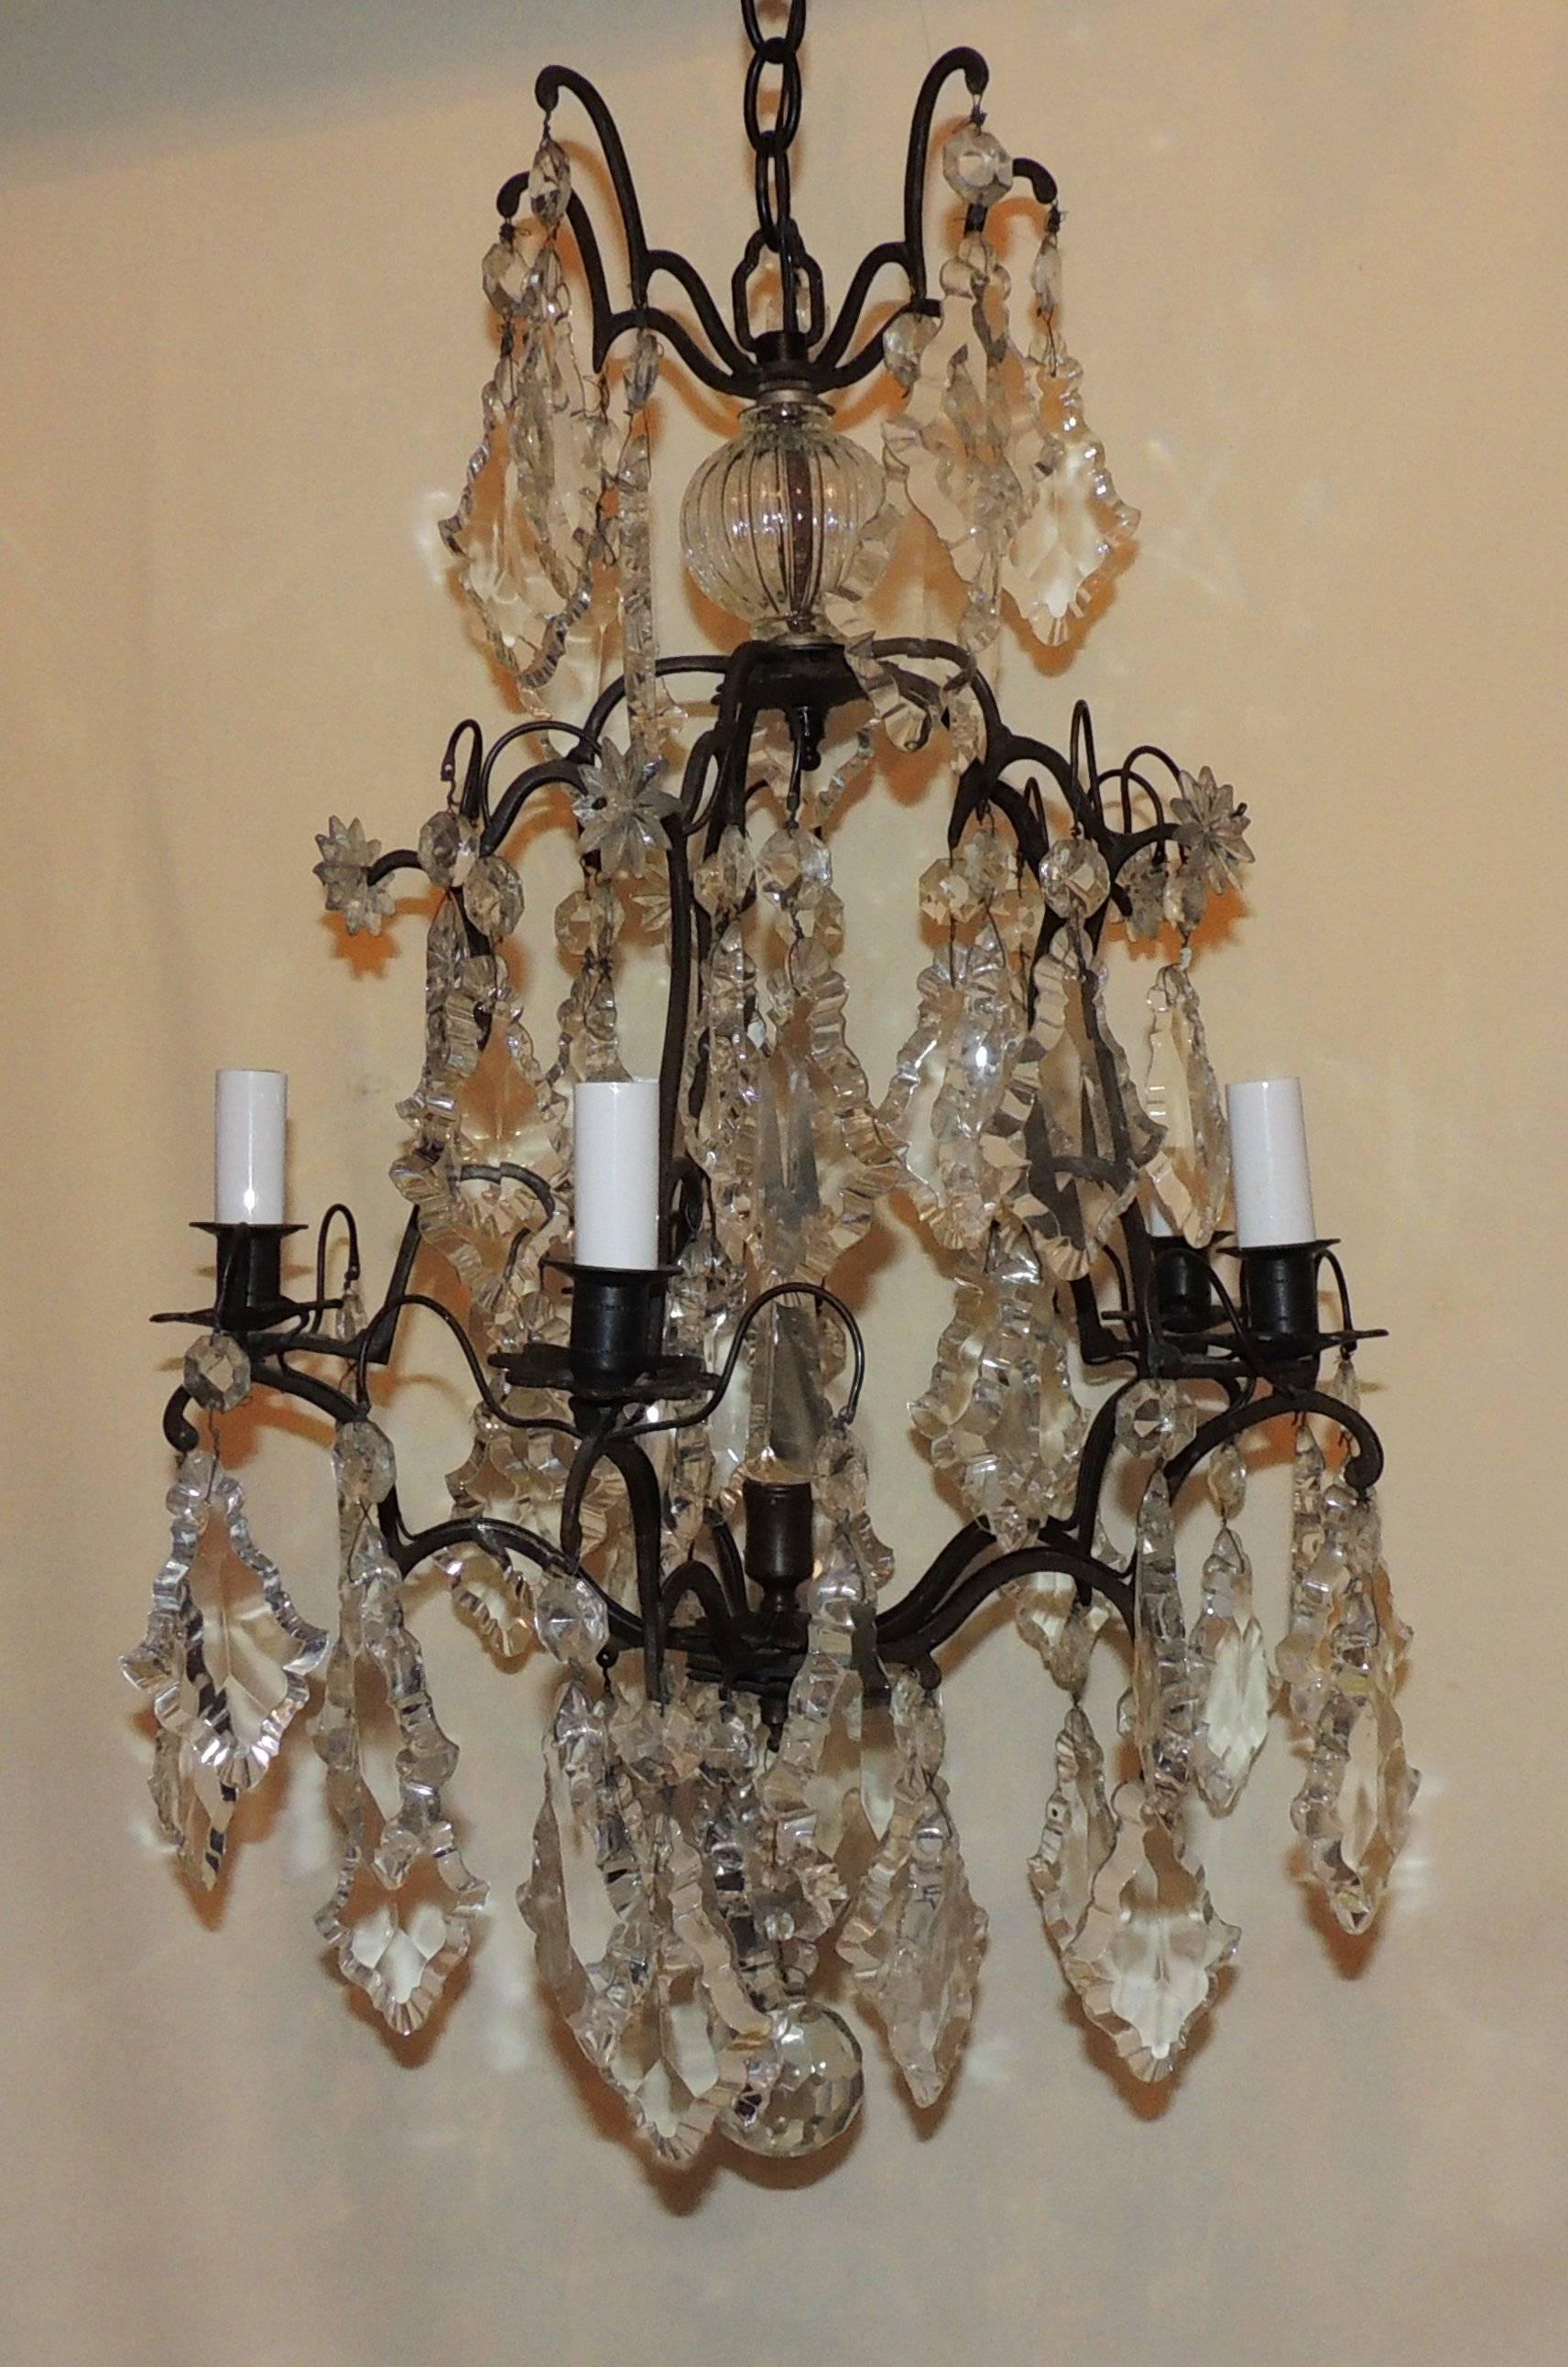 Charming French Bronze and crystal Five-light chandelier with clear cut crystals and center crystal finial.

Measures: 24